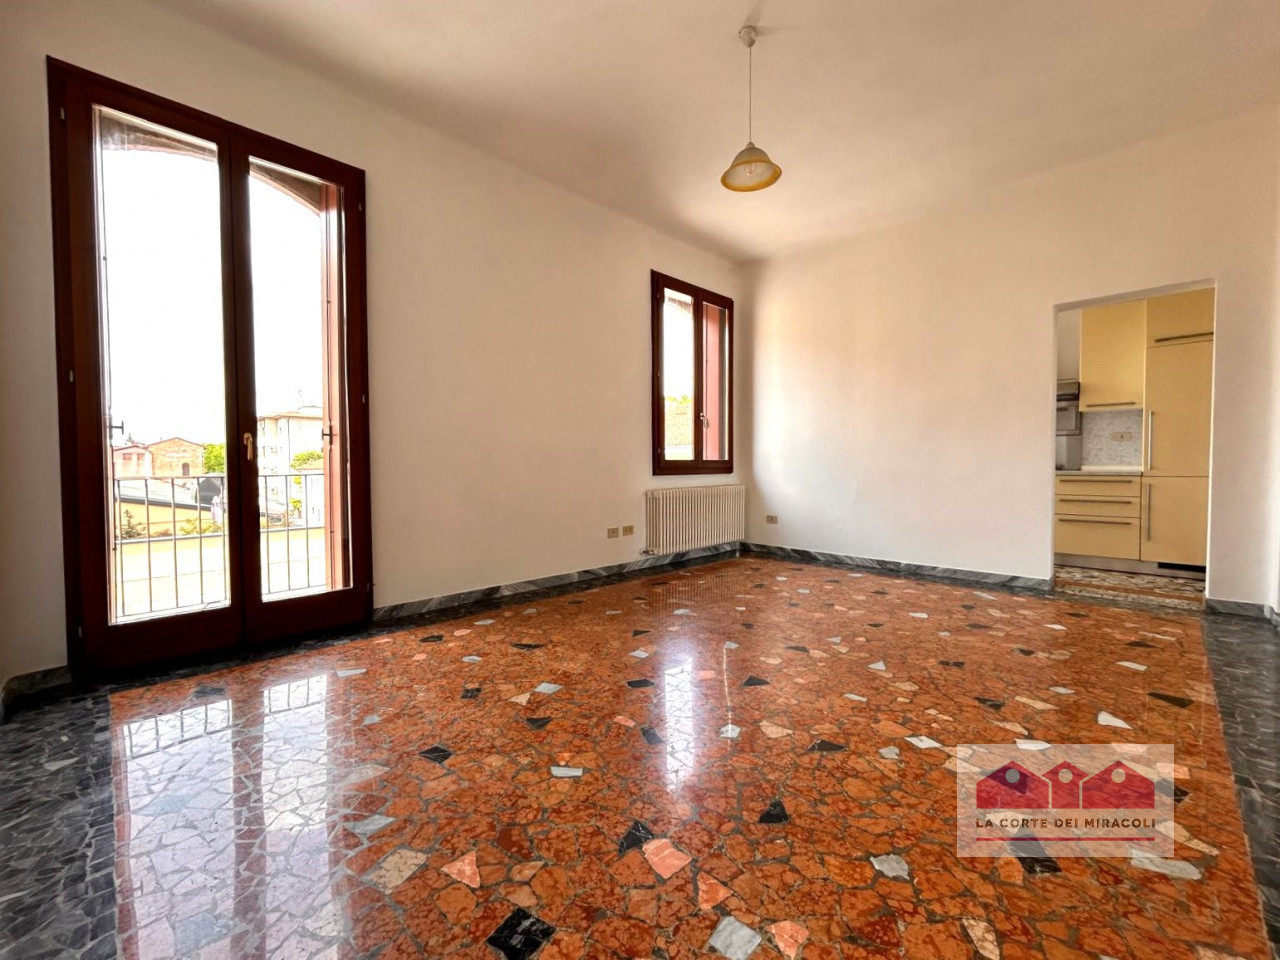 BRIGHT AND RENOVATED APARTMENT IN VICENZA DOWNTOWN